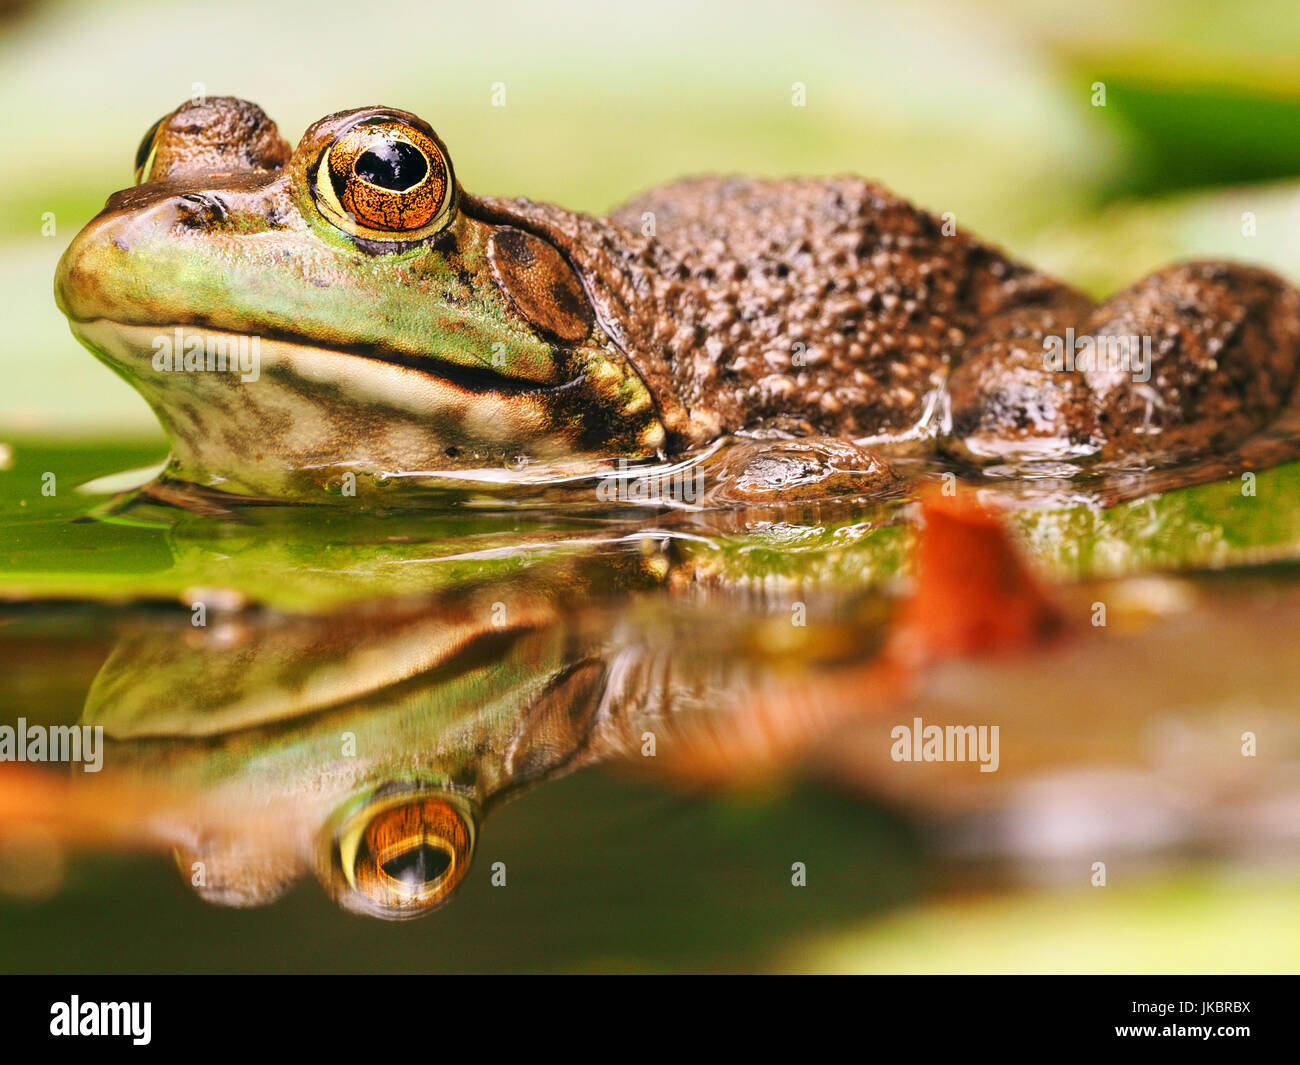 Frog with Prominent Eyes and its Reflection on Water Stock Photo